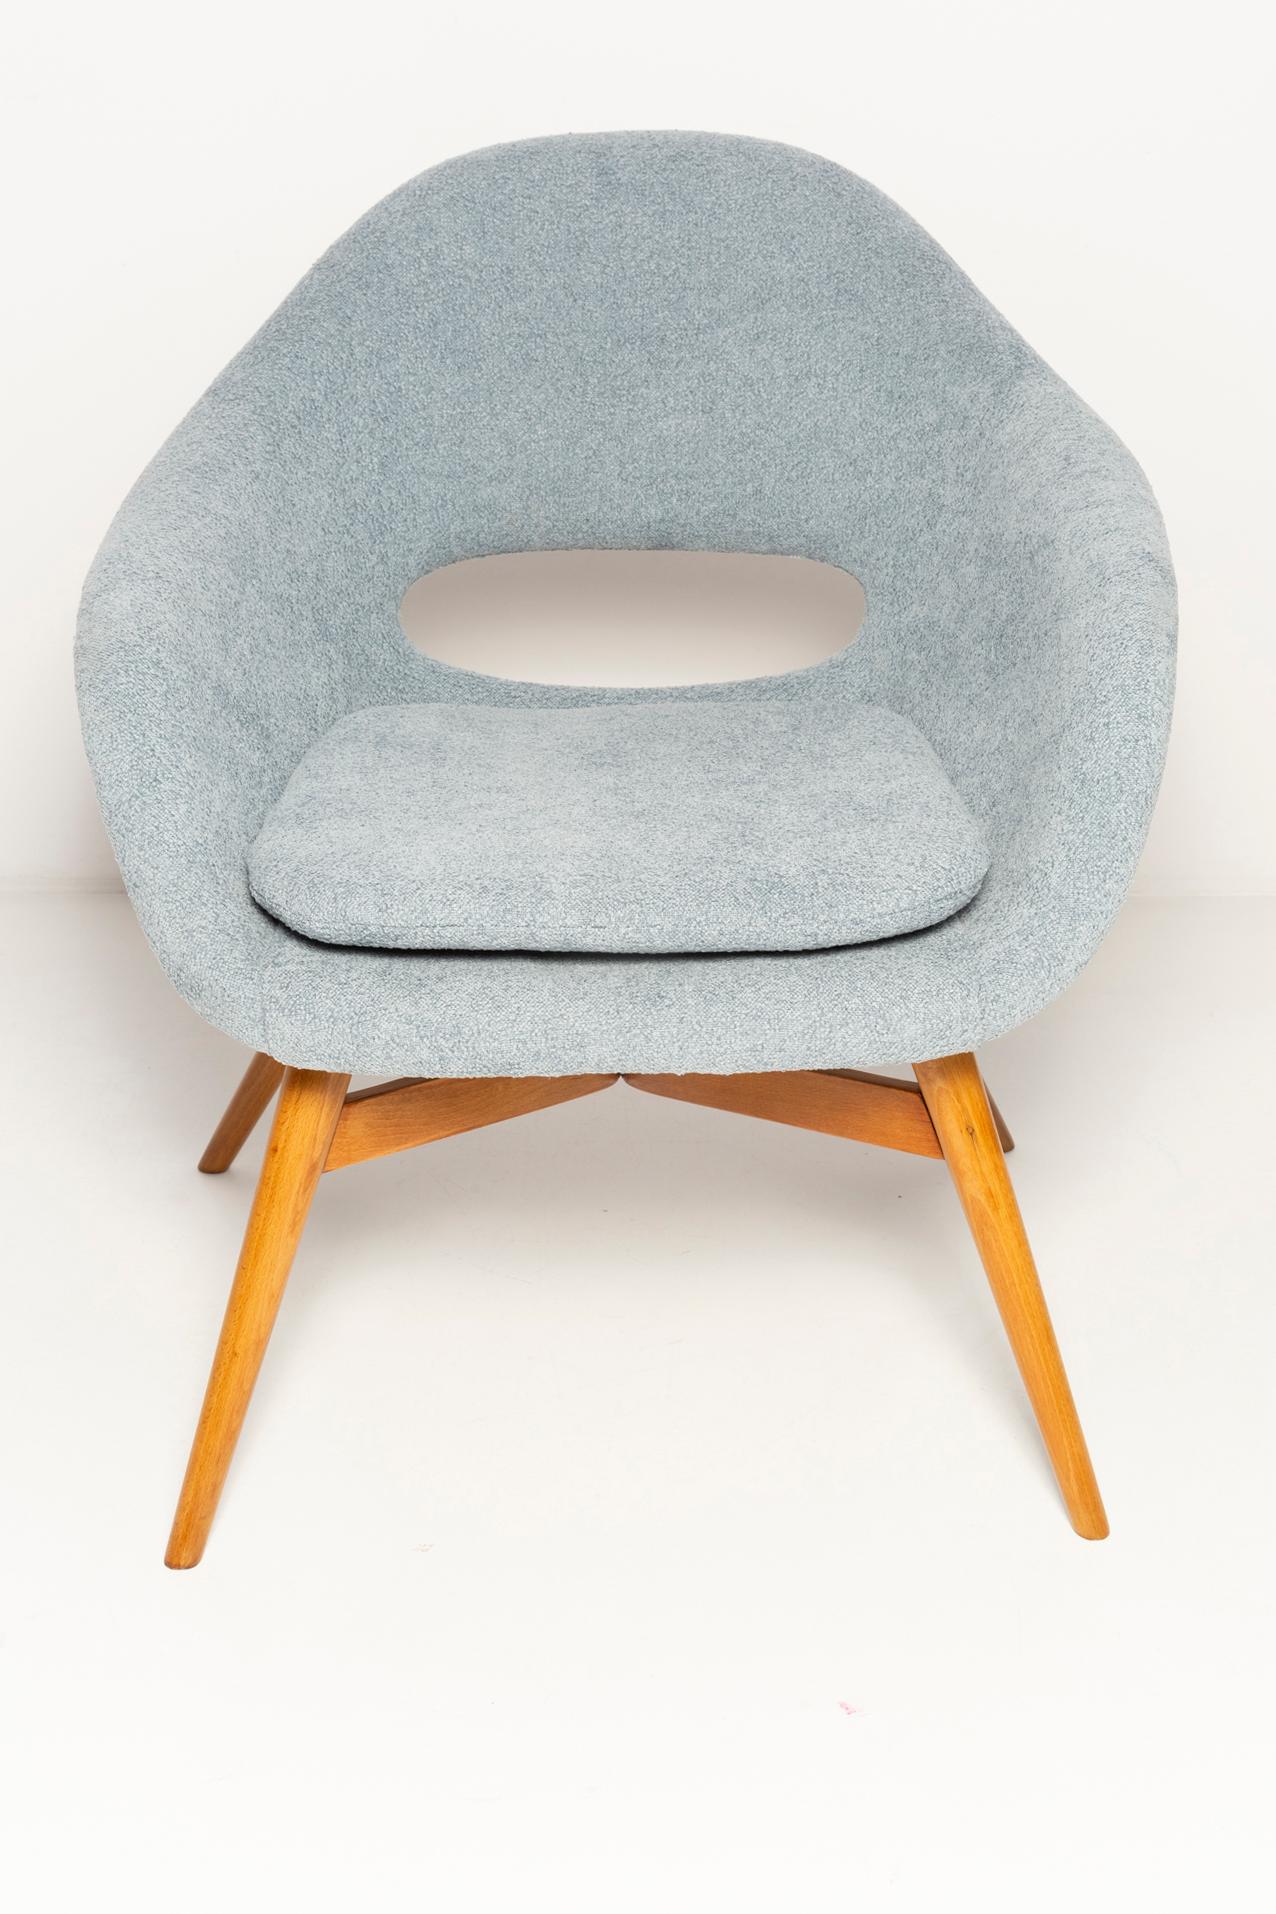 Fabric Set of Two Mid-Century Light Blue Shell Chairs, by Navratil, Czechoslovakia 1960 For Sale